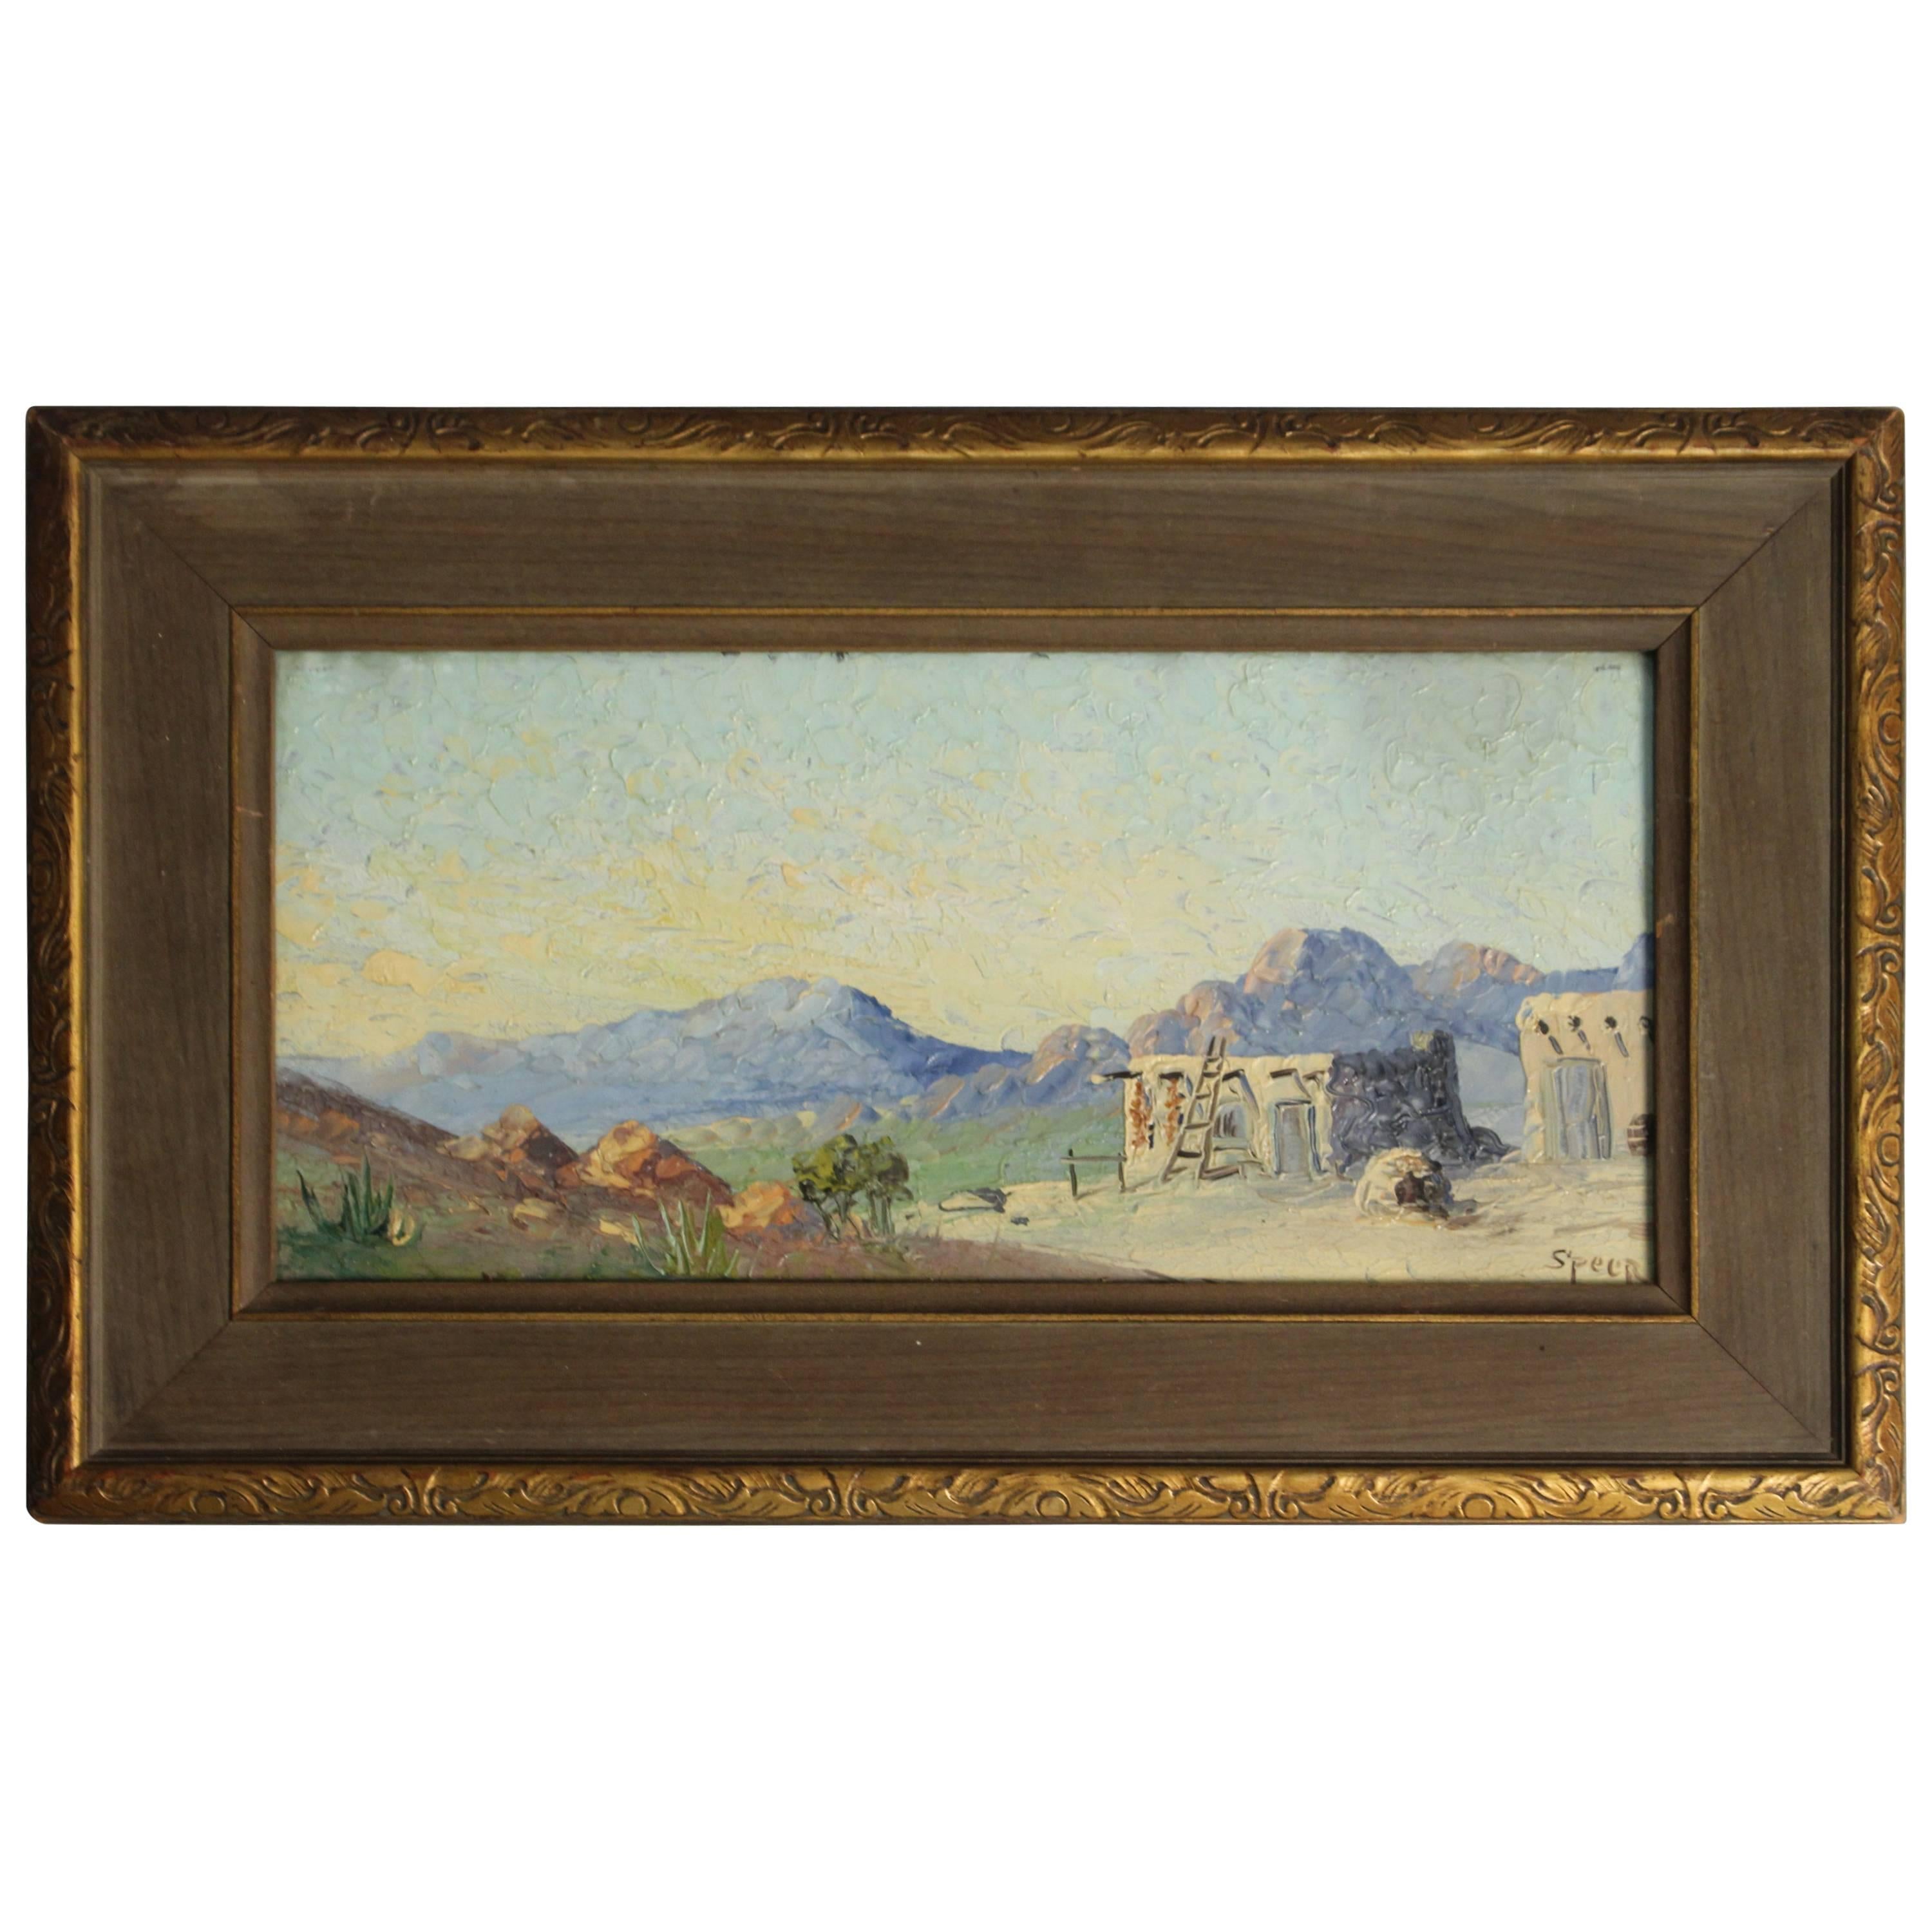 Desert Landscape of the South West, circa 1920s